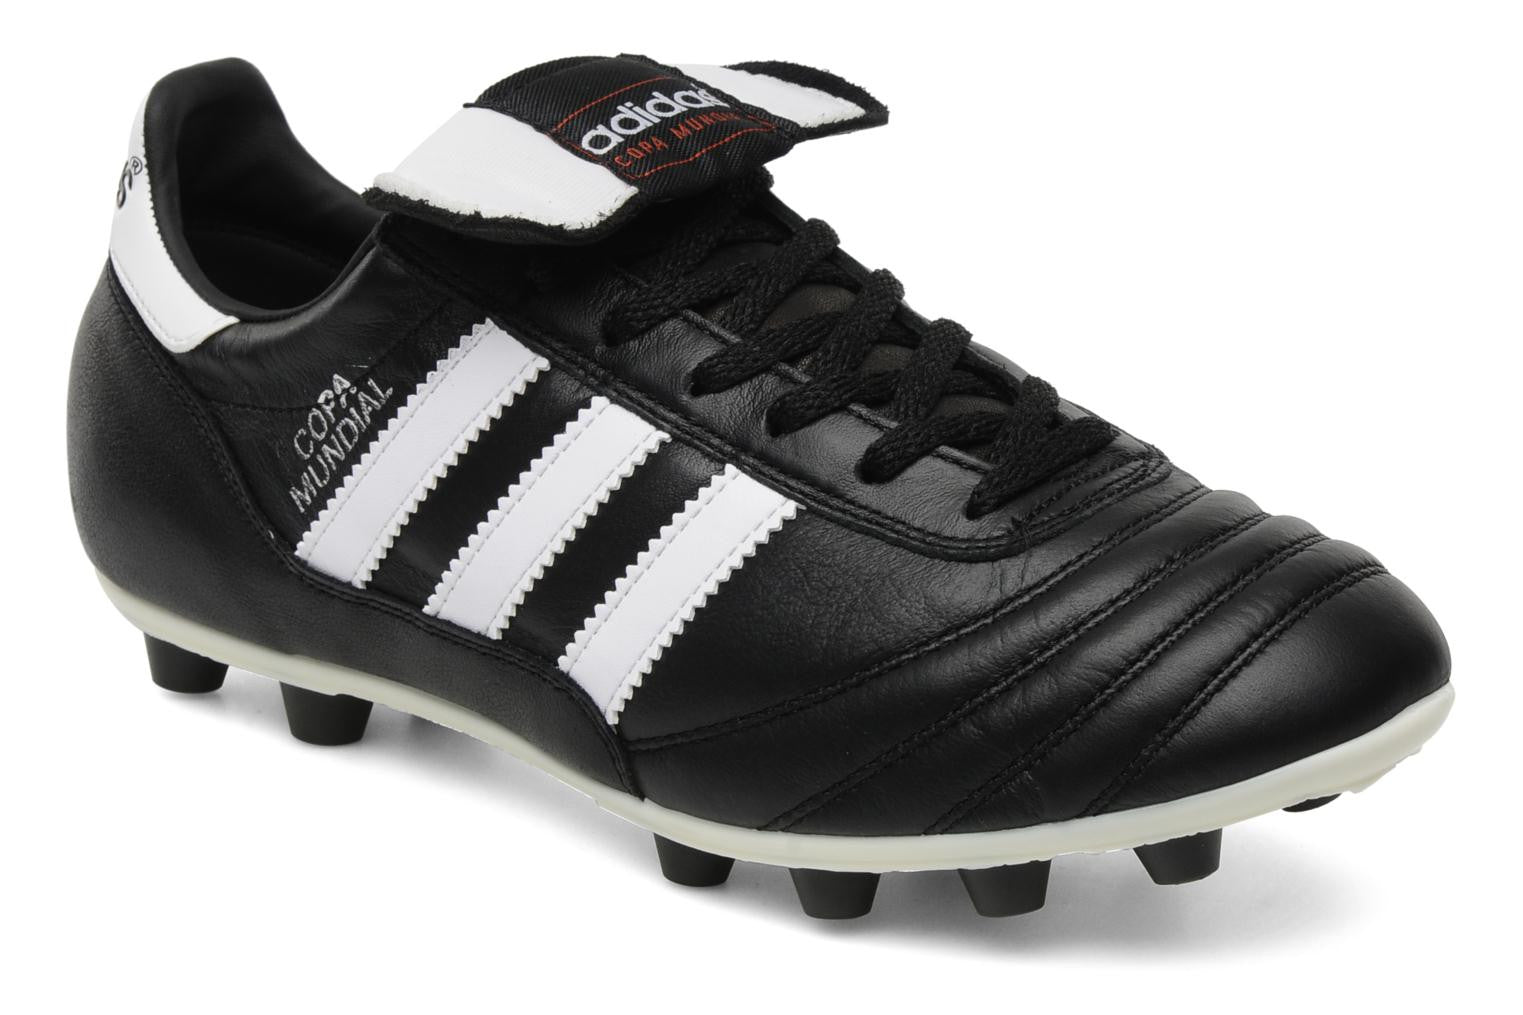 Goodwill Prik Nevelig adidas Copa Mundial FG Soccer Cleats – Strictly Soccer Shoppe